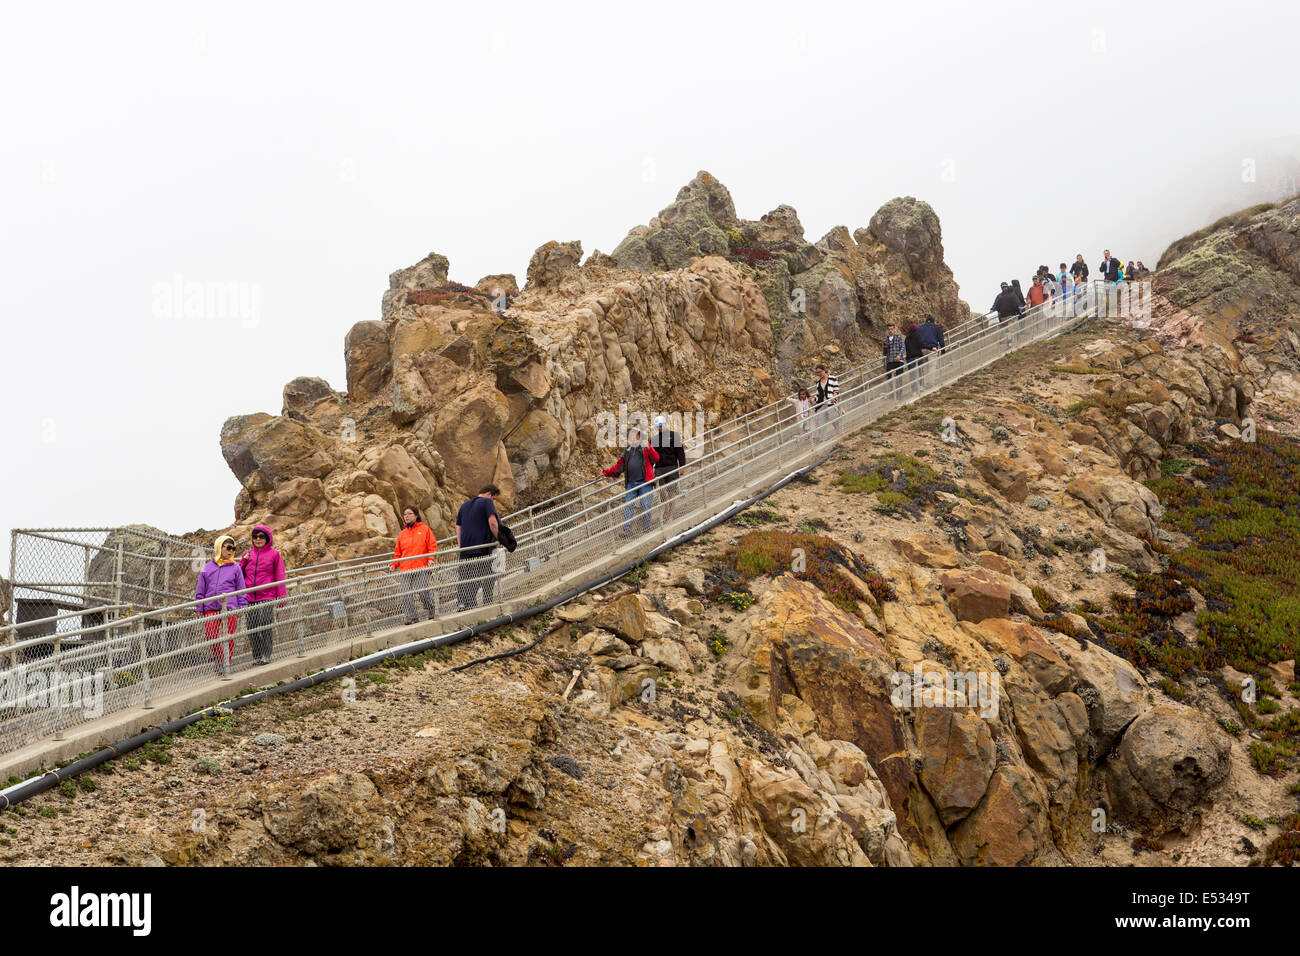 People tourists on stairway to Point Reyes Lighthouse in Point Reyes National Seashore Marin County California United States Nor Stock Photo